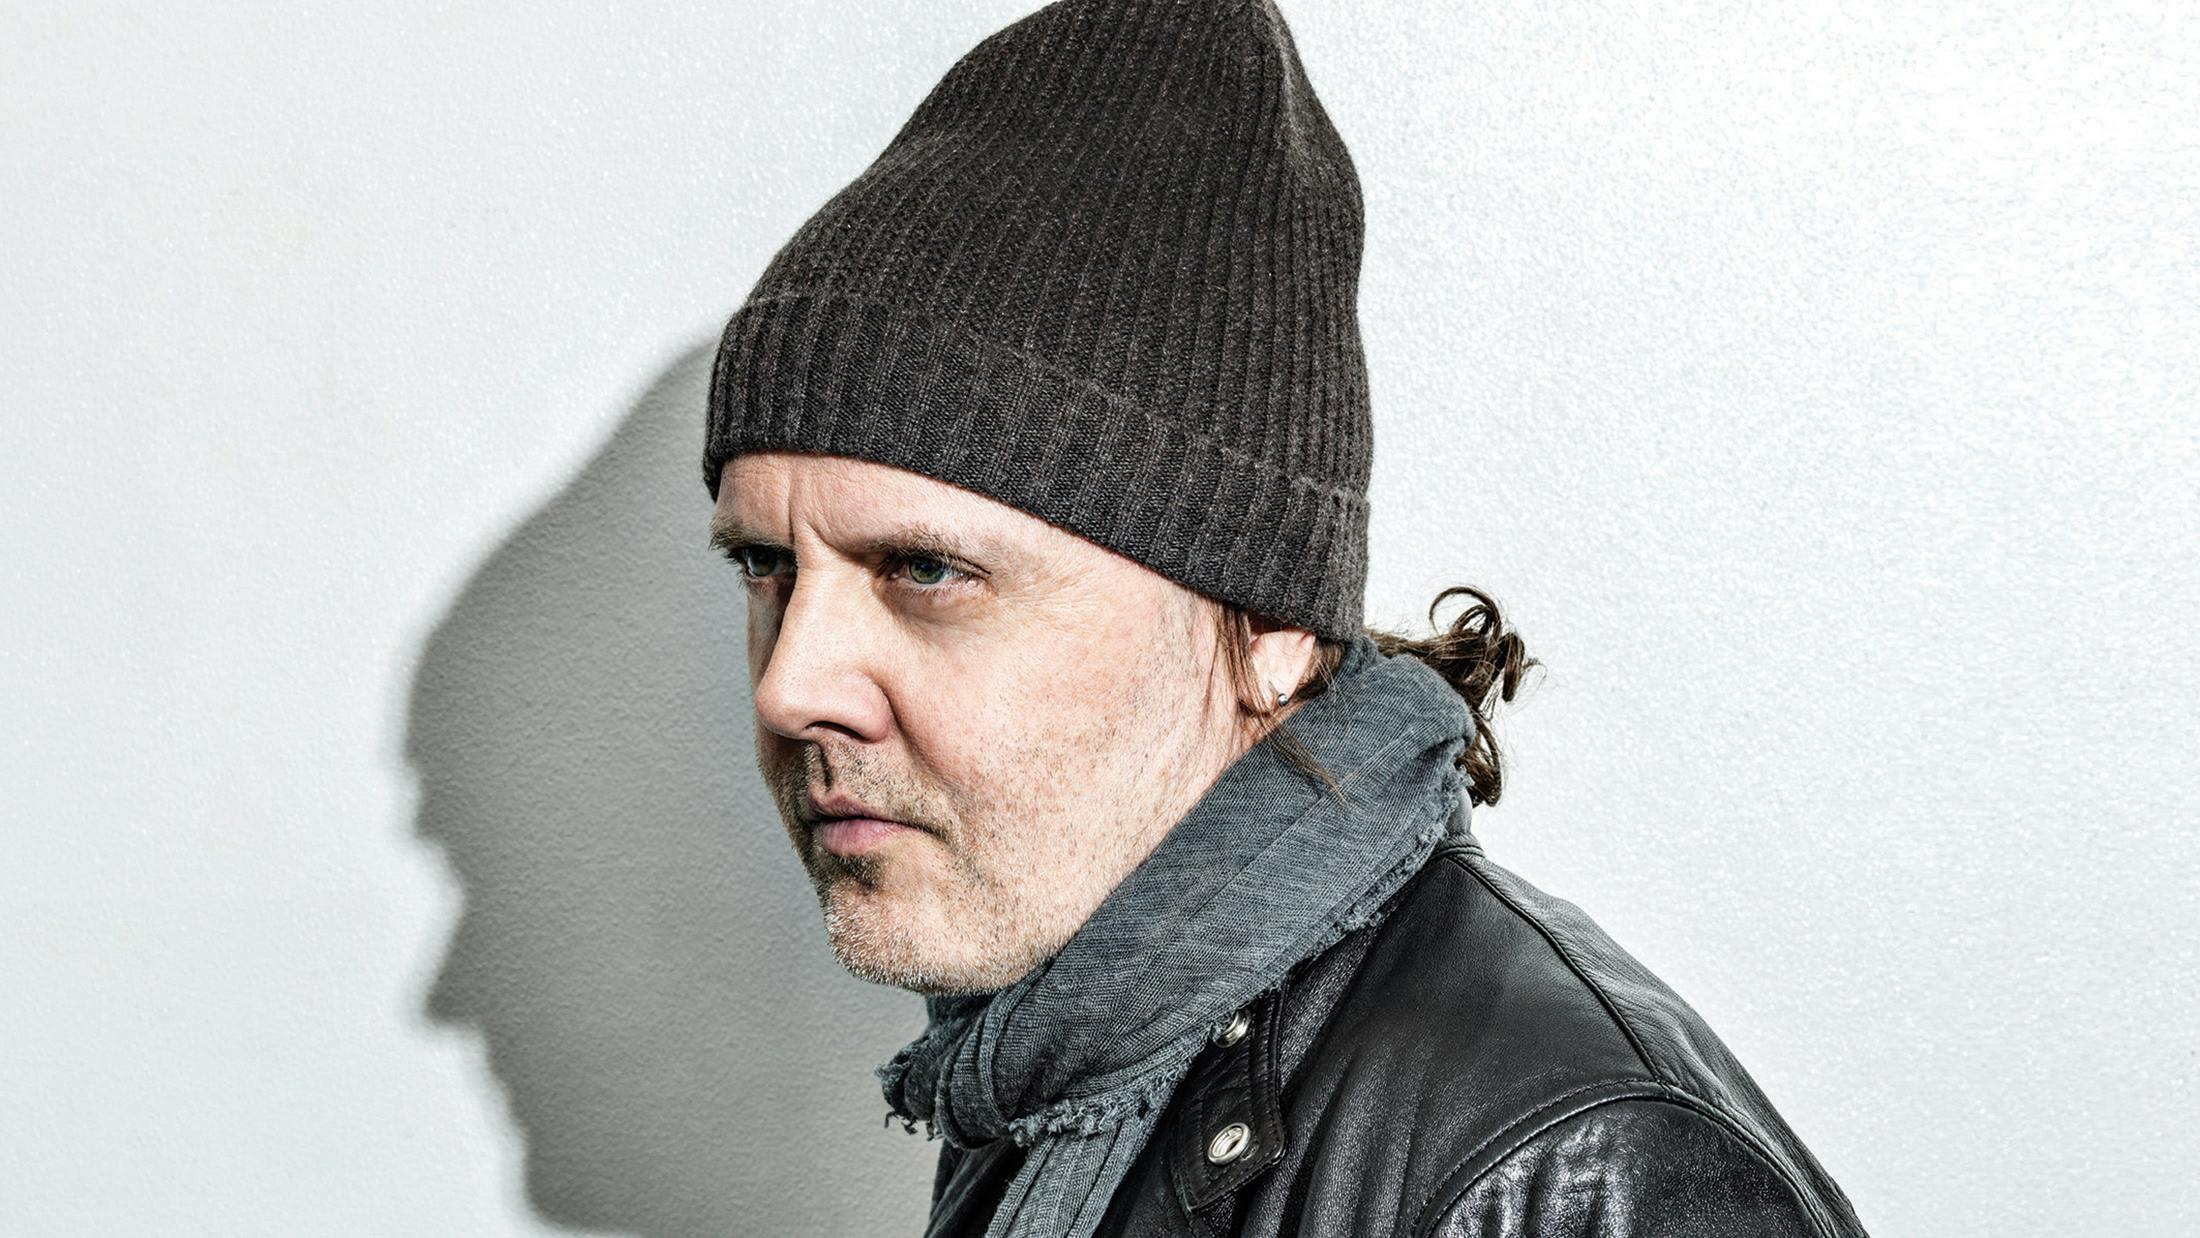 Metallica’s Lars Ulrich: “I still have a crazy thing about music. I've never lost the sense of being a fan…”